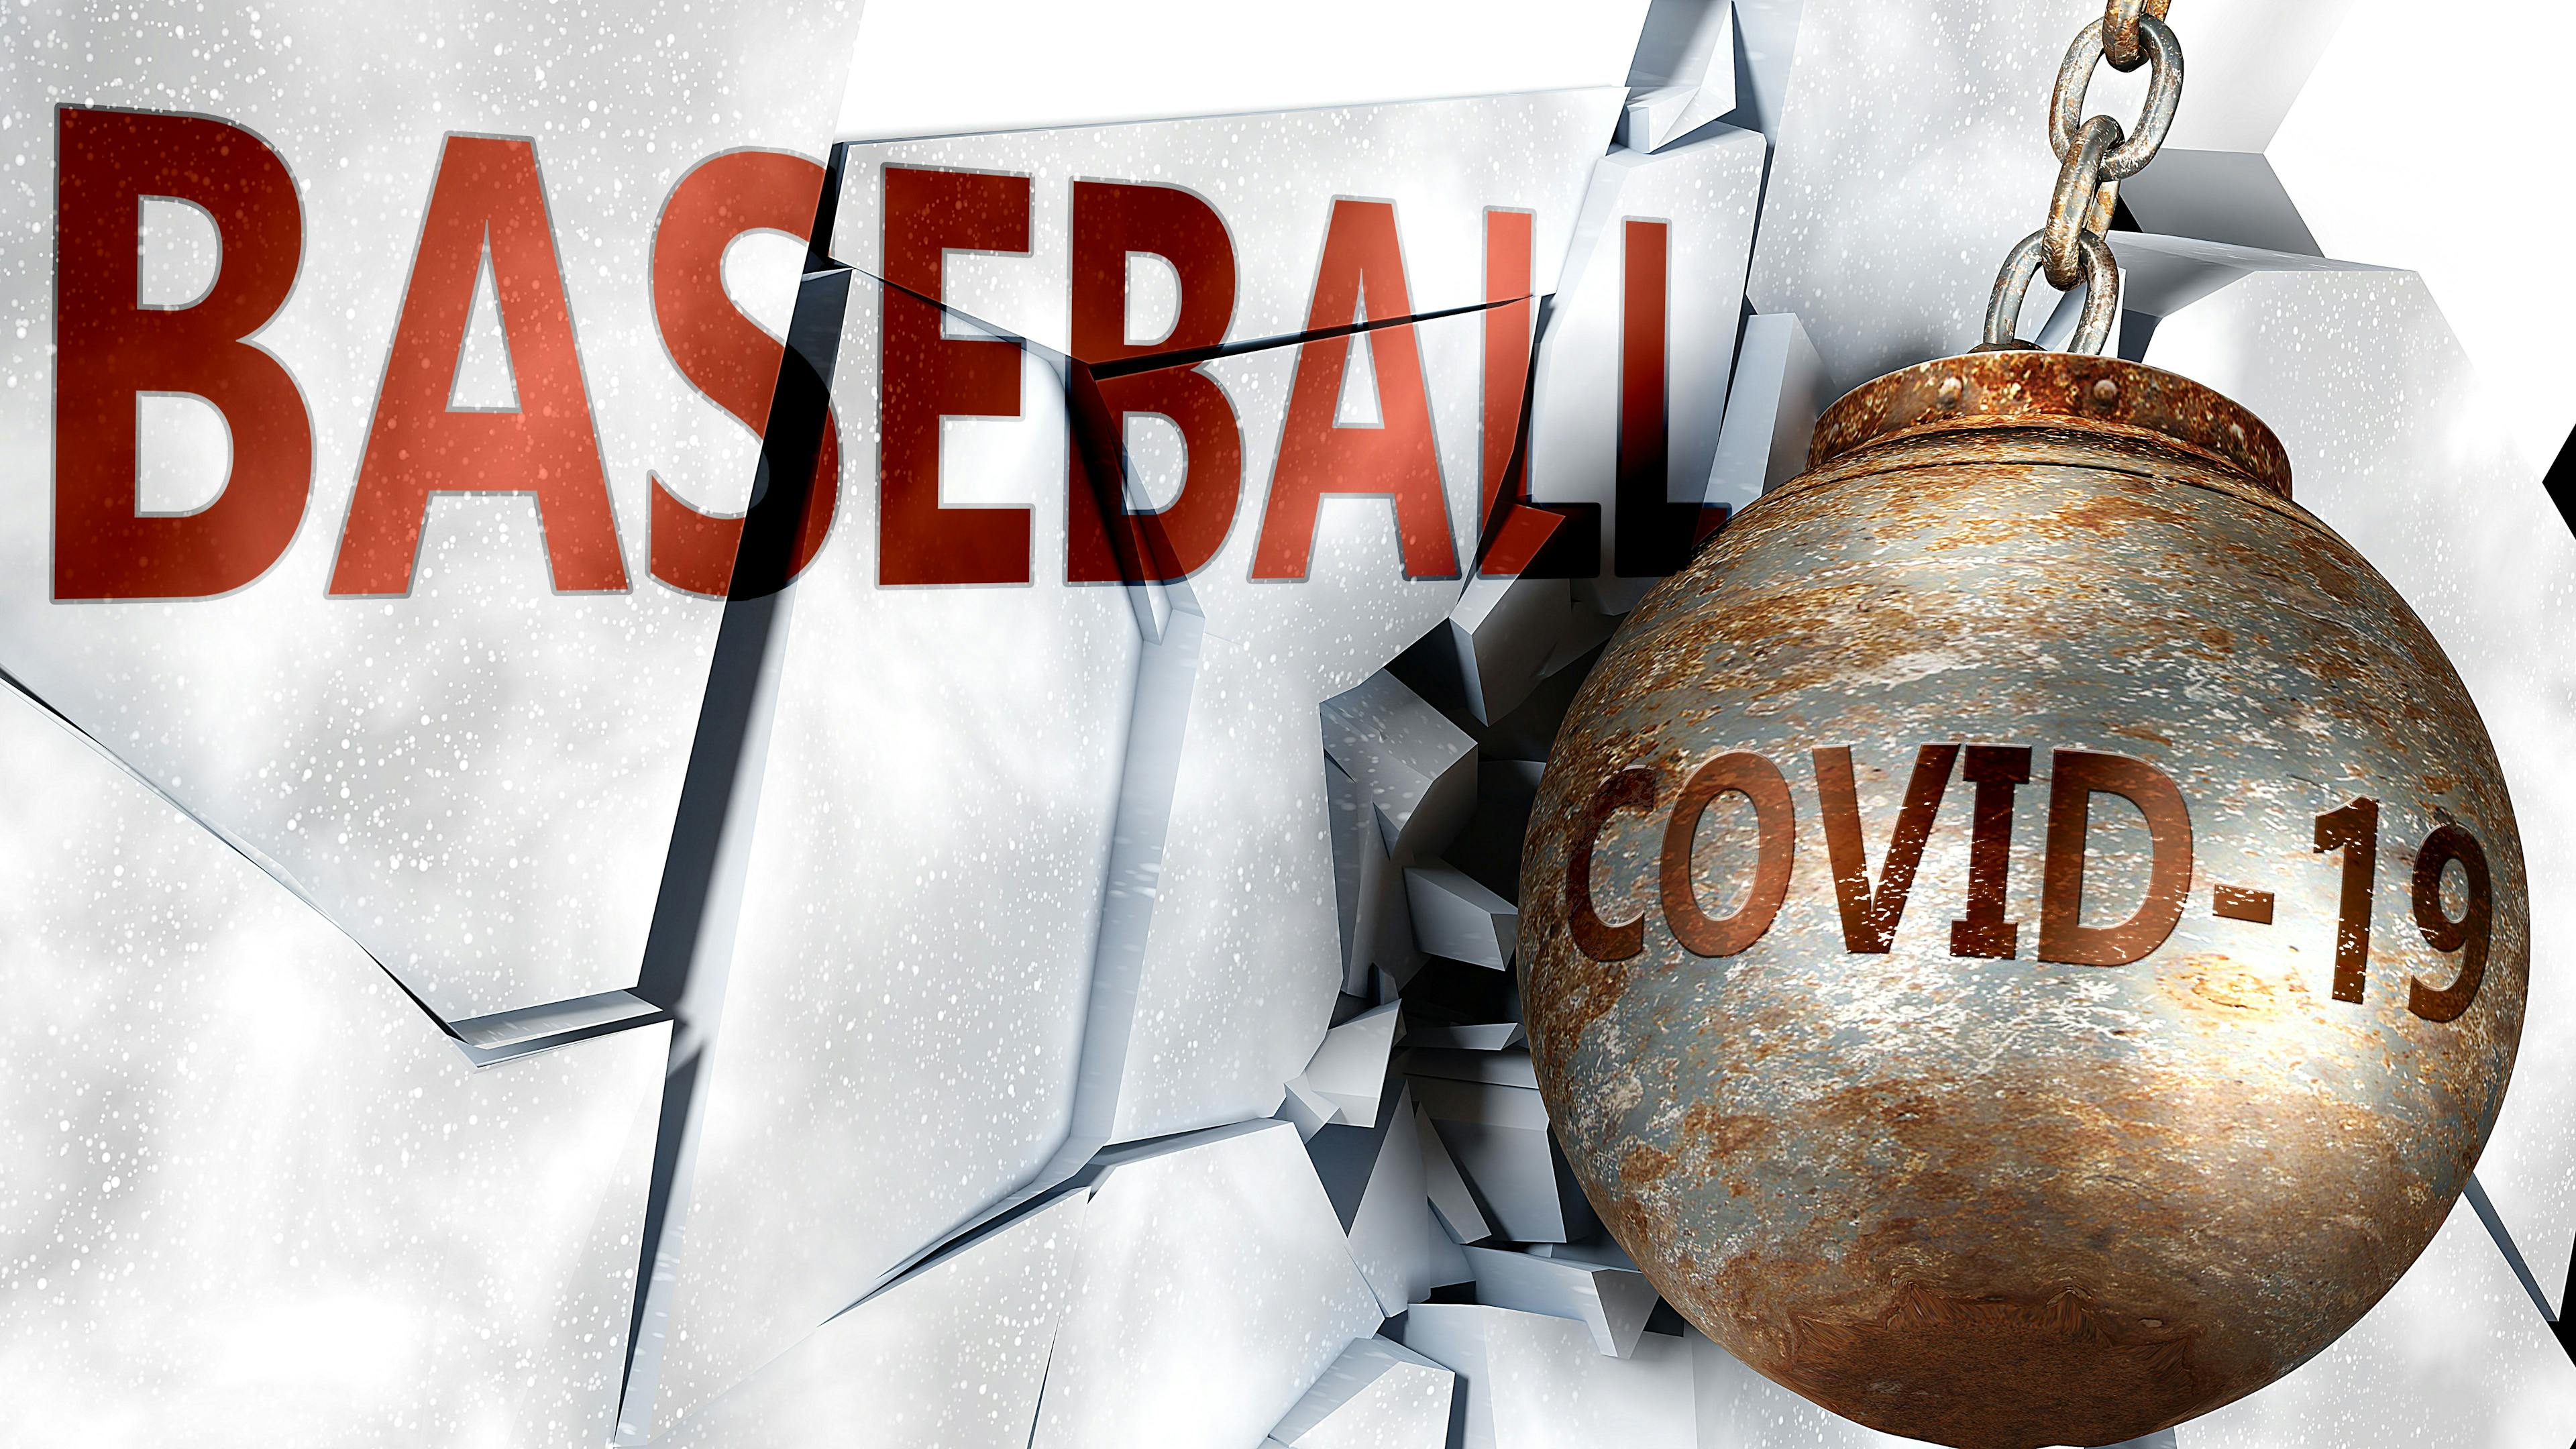 Baseball season’s looming strikeout shows importance of following COVID-19 safety guidelines 